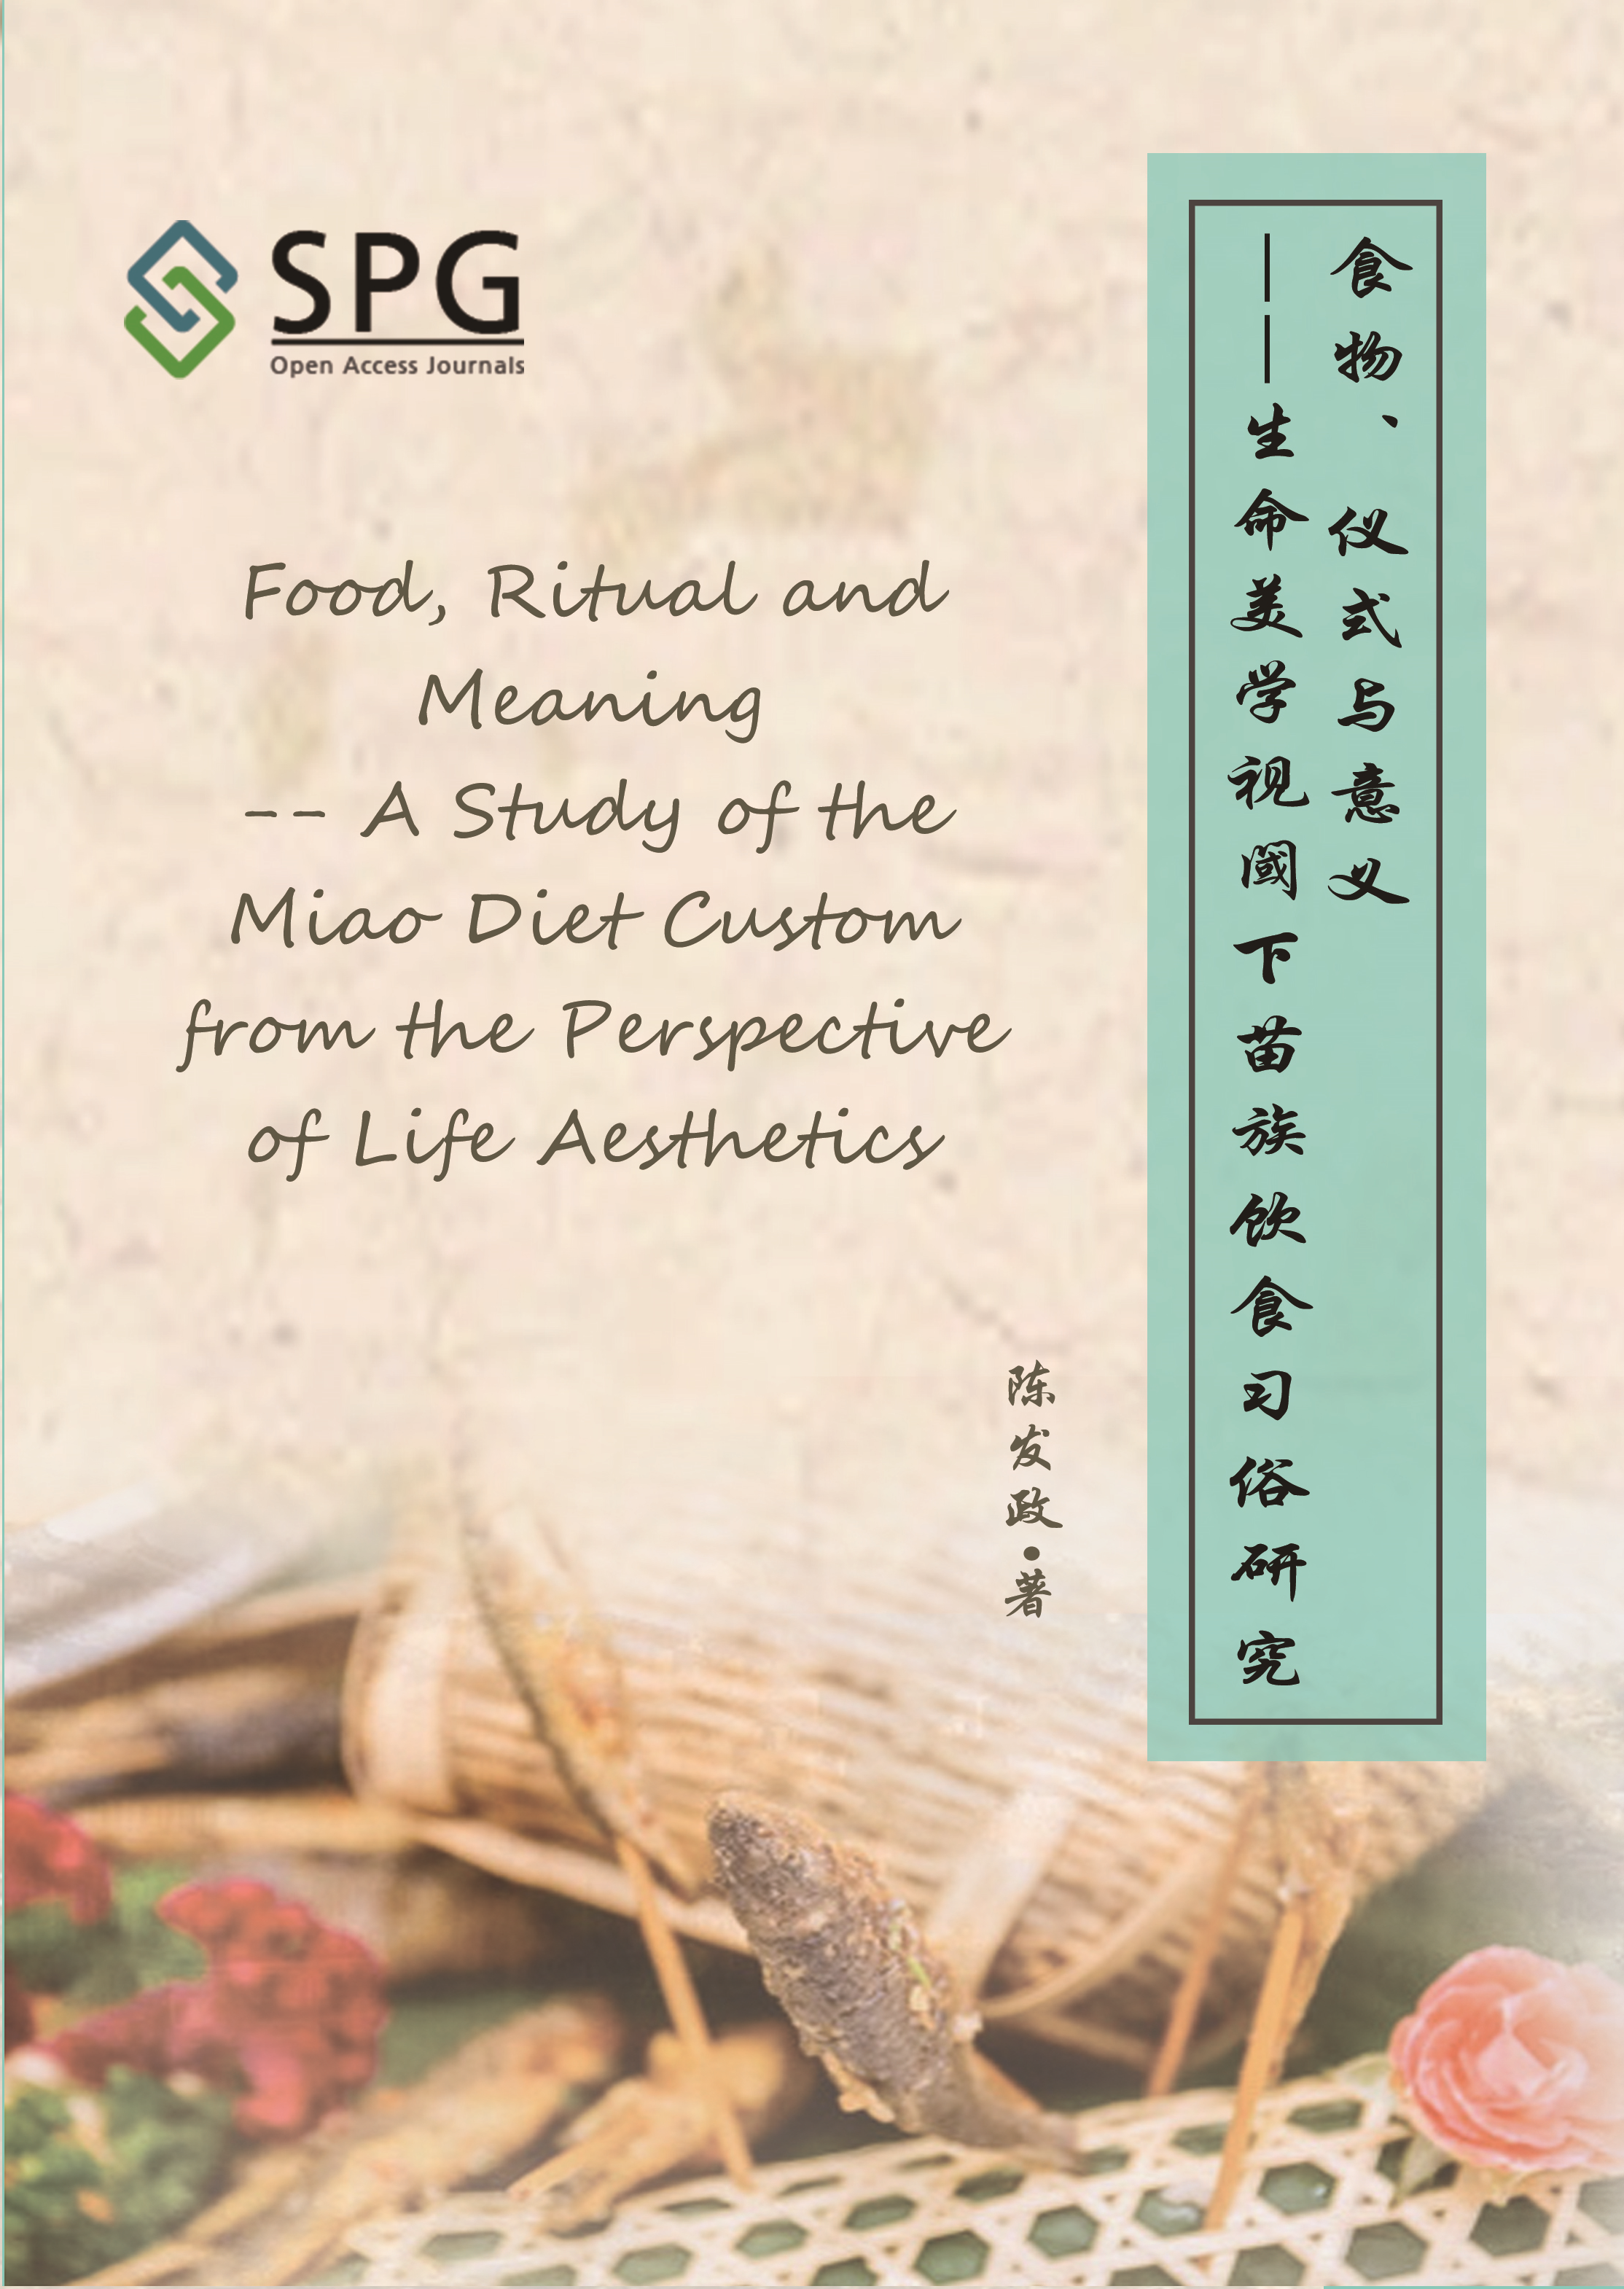 Food, Ritual and Meaning -- A Study of the Miao Diet Custom from the Perspective of Life Aesthetics | Scholar Publishing Group